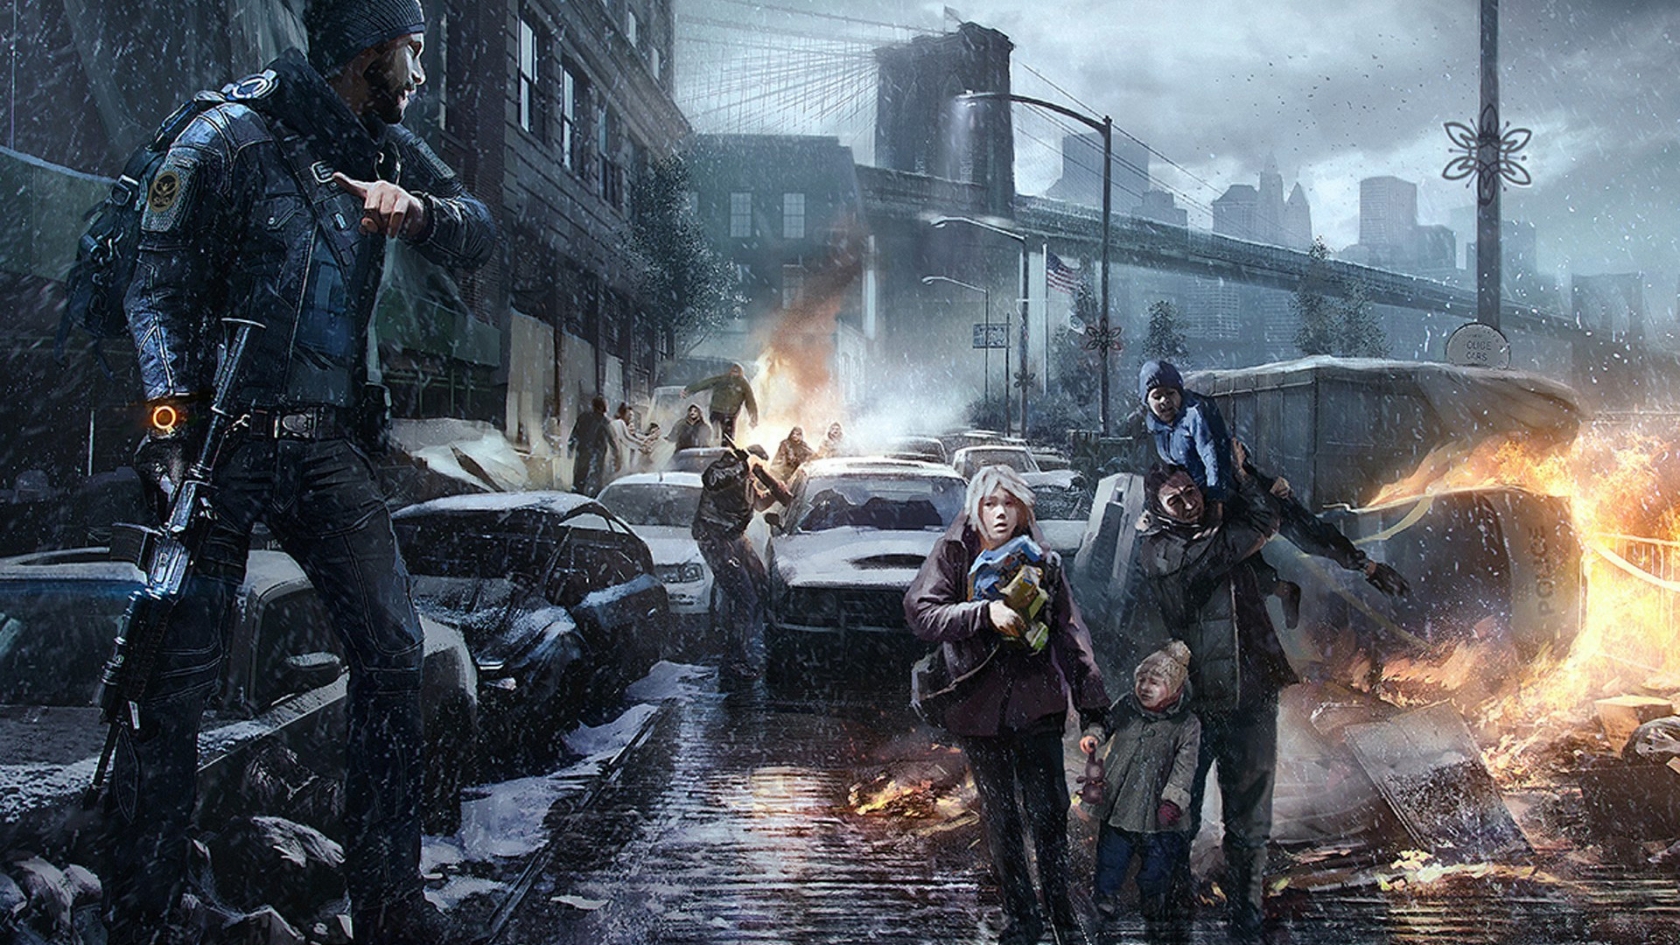 Tom Clancy The Division Fan Art for 1680 x 945 HDTV resolution